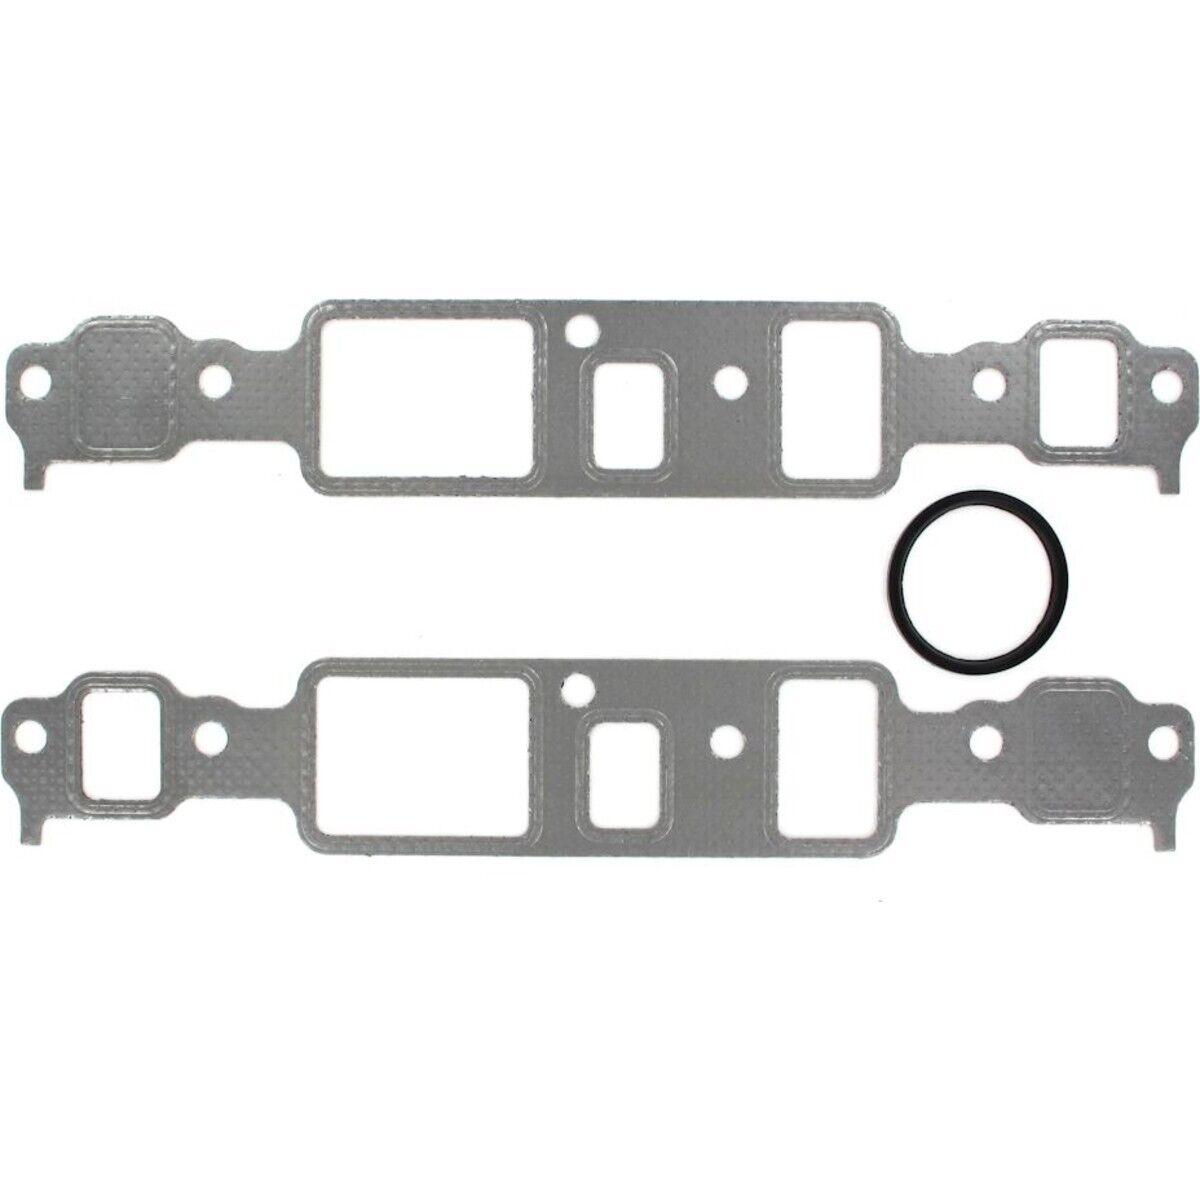 AMS3250 APEX Set Intake Manifold Gaskets for Chevy Olds Express Van S10 Pickup